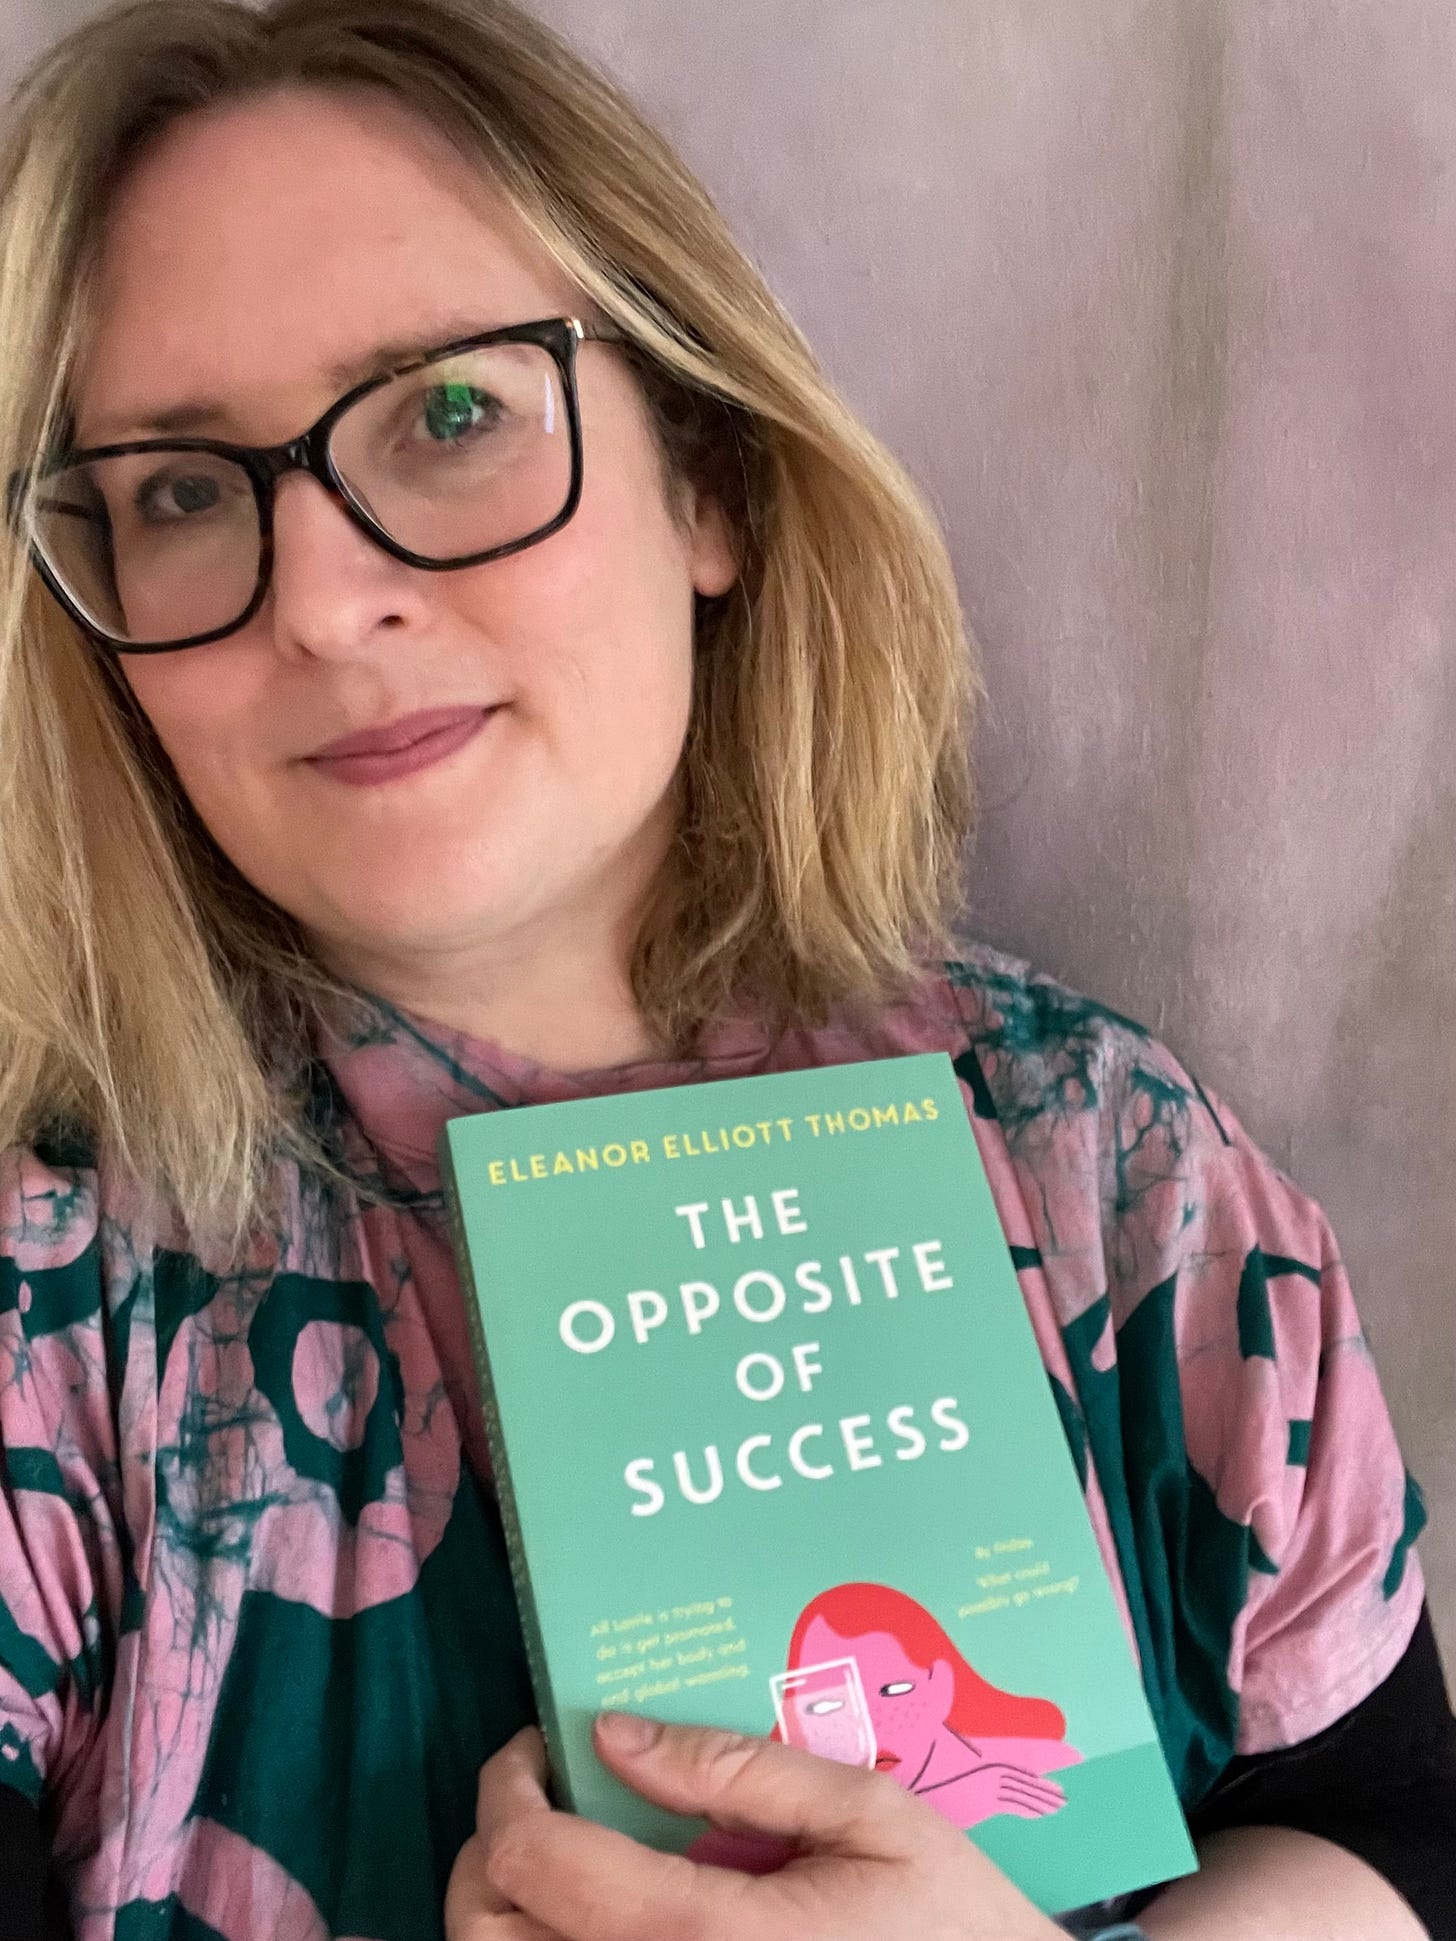 The author, a blonde woman in glasses and a pink and green top, looks at the camera while holding a copy of The Opposite of Success, which has a green cover with a cartoonish illustration of a woman looking sideways